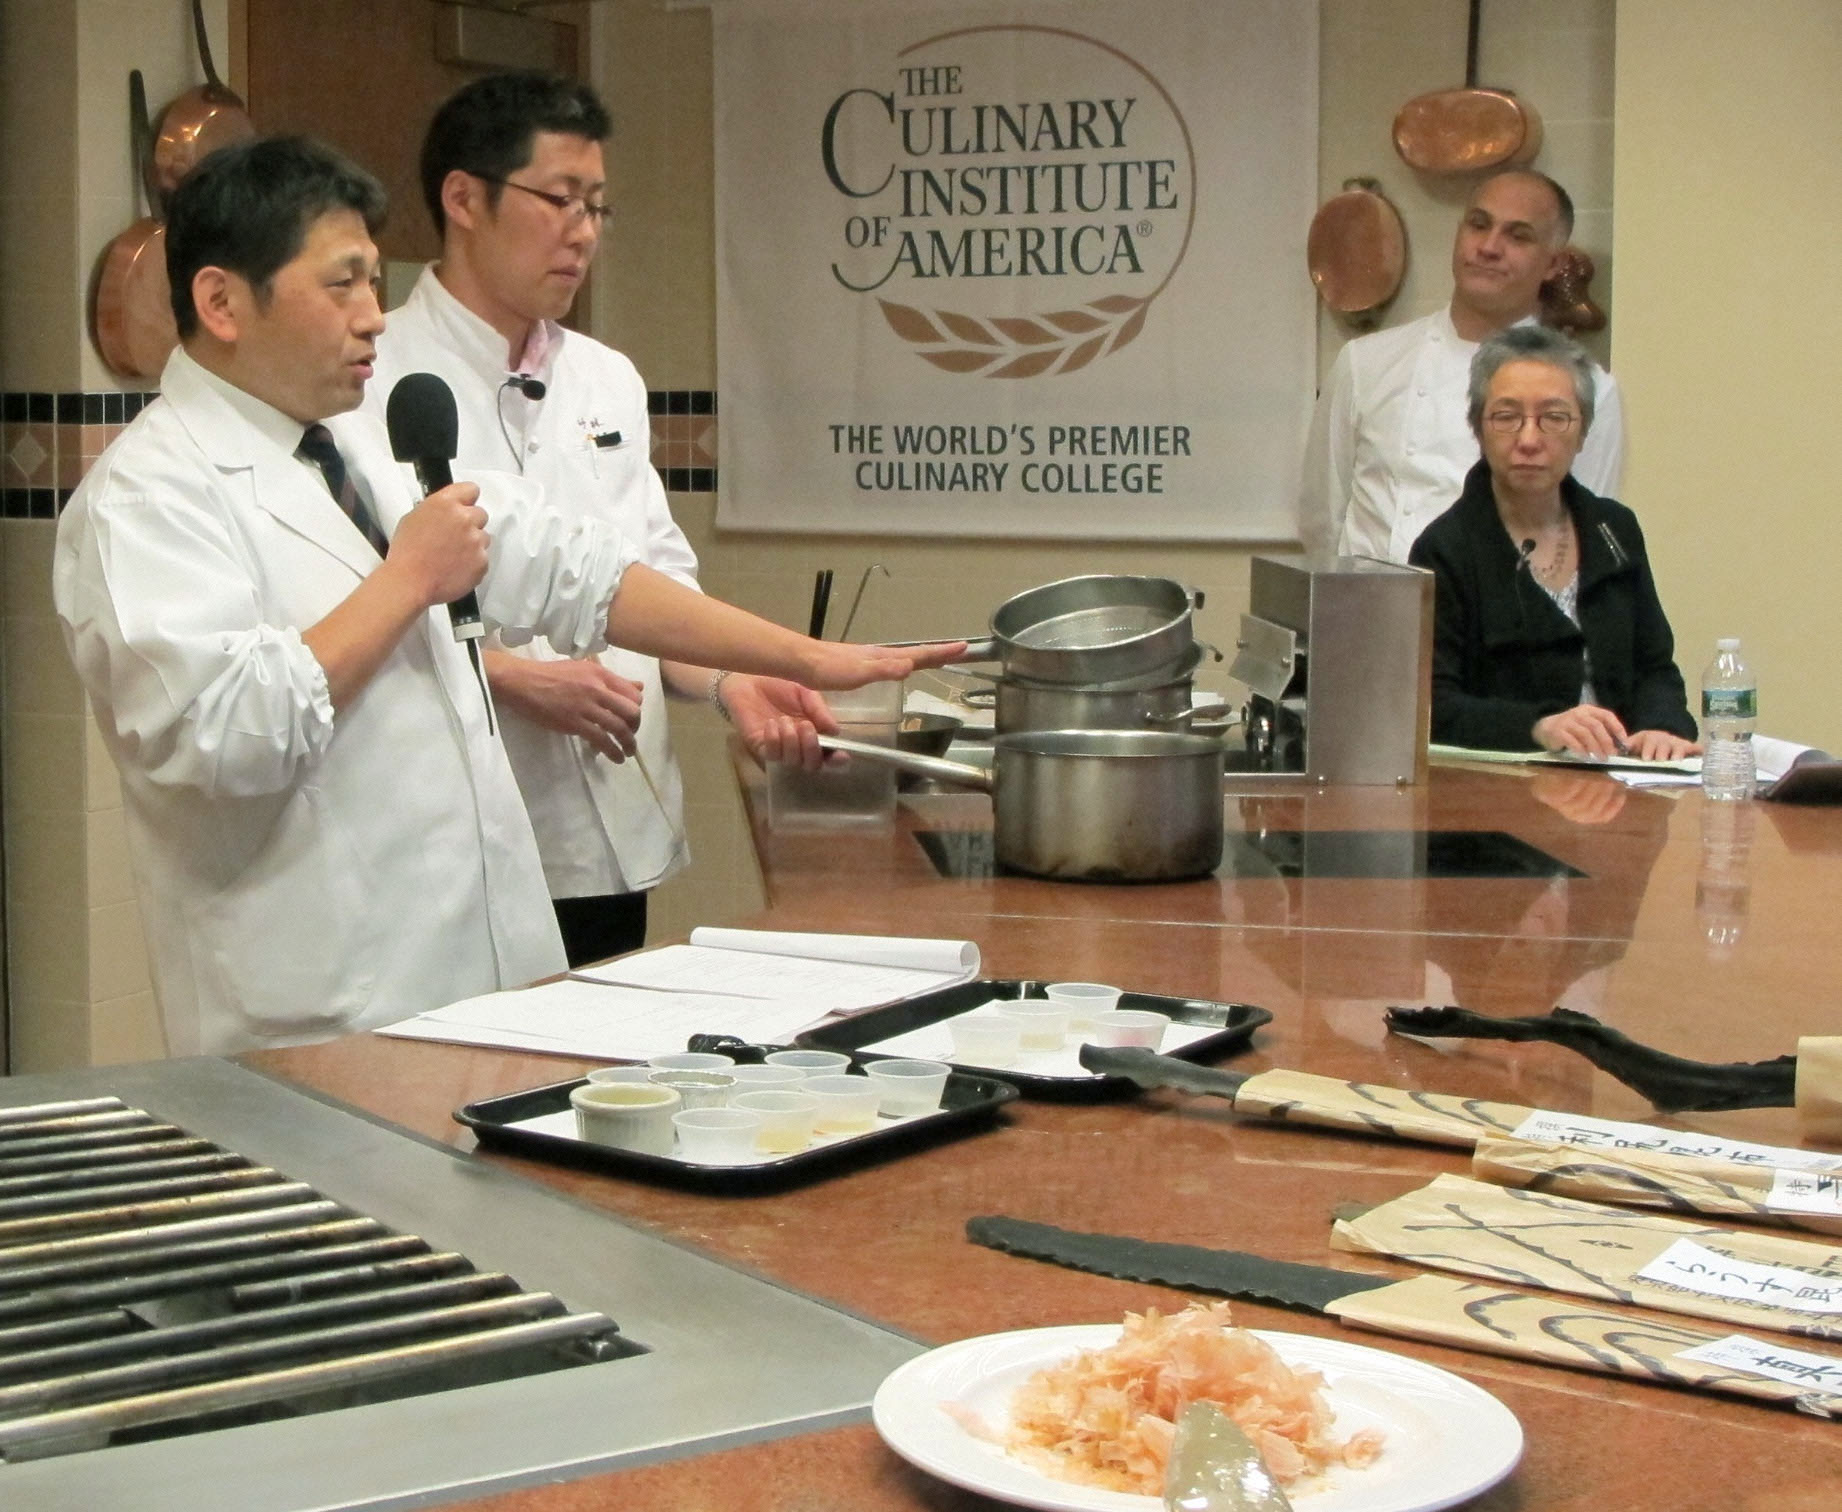 Motokazu Nakamura (left), master chef at Japanese restaurant Nakamura Kyoto Cuisine, speaks about the umami taste during a seminar at the Culinary Institute of America, a cooking school in New York, on Feb. 4, 2013. | COURTESY OF UMAMI INFORMATION CENTER/KYODO